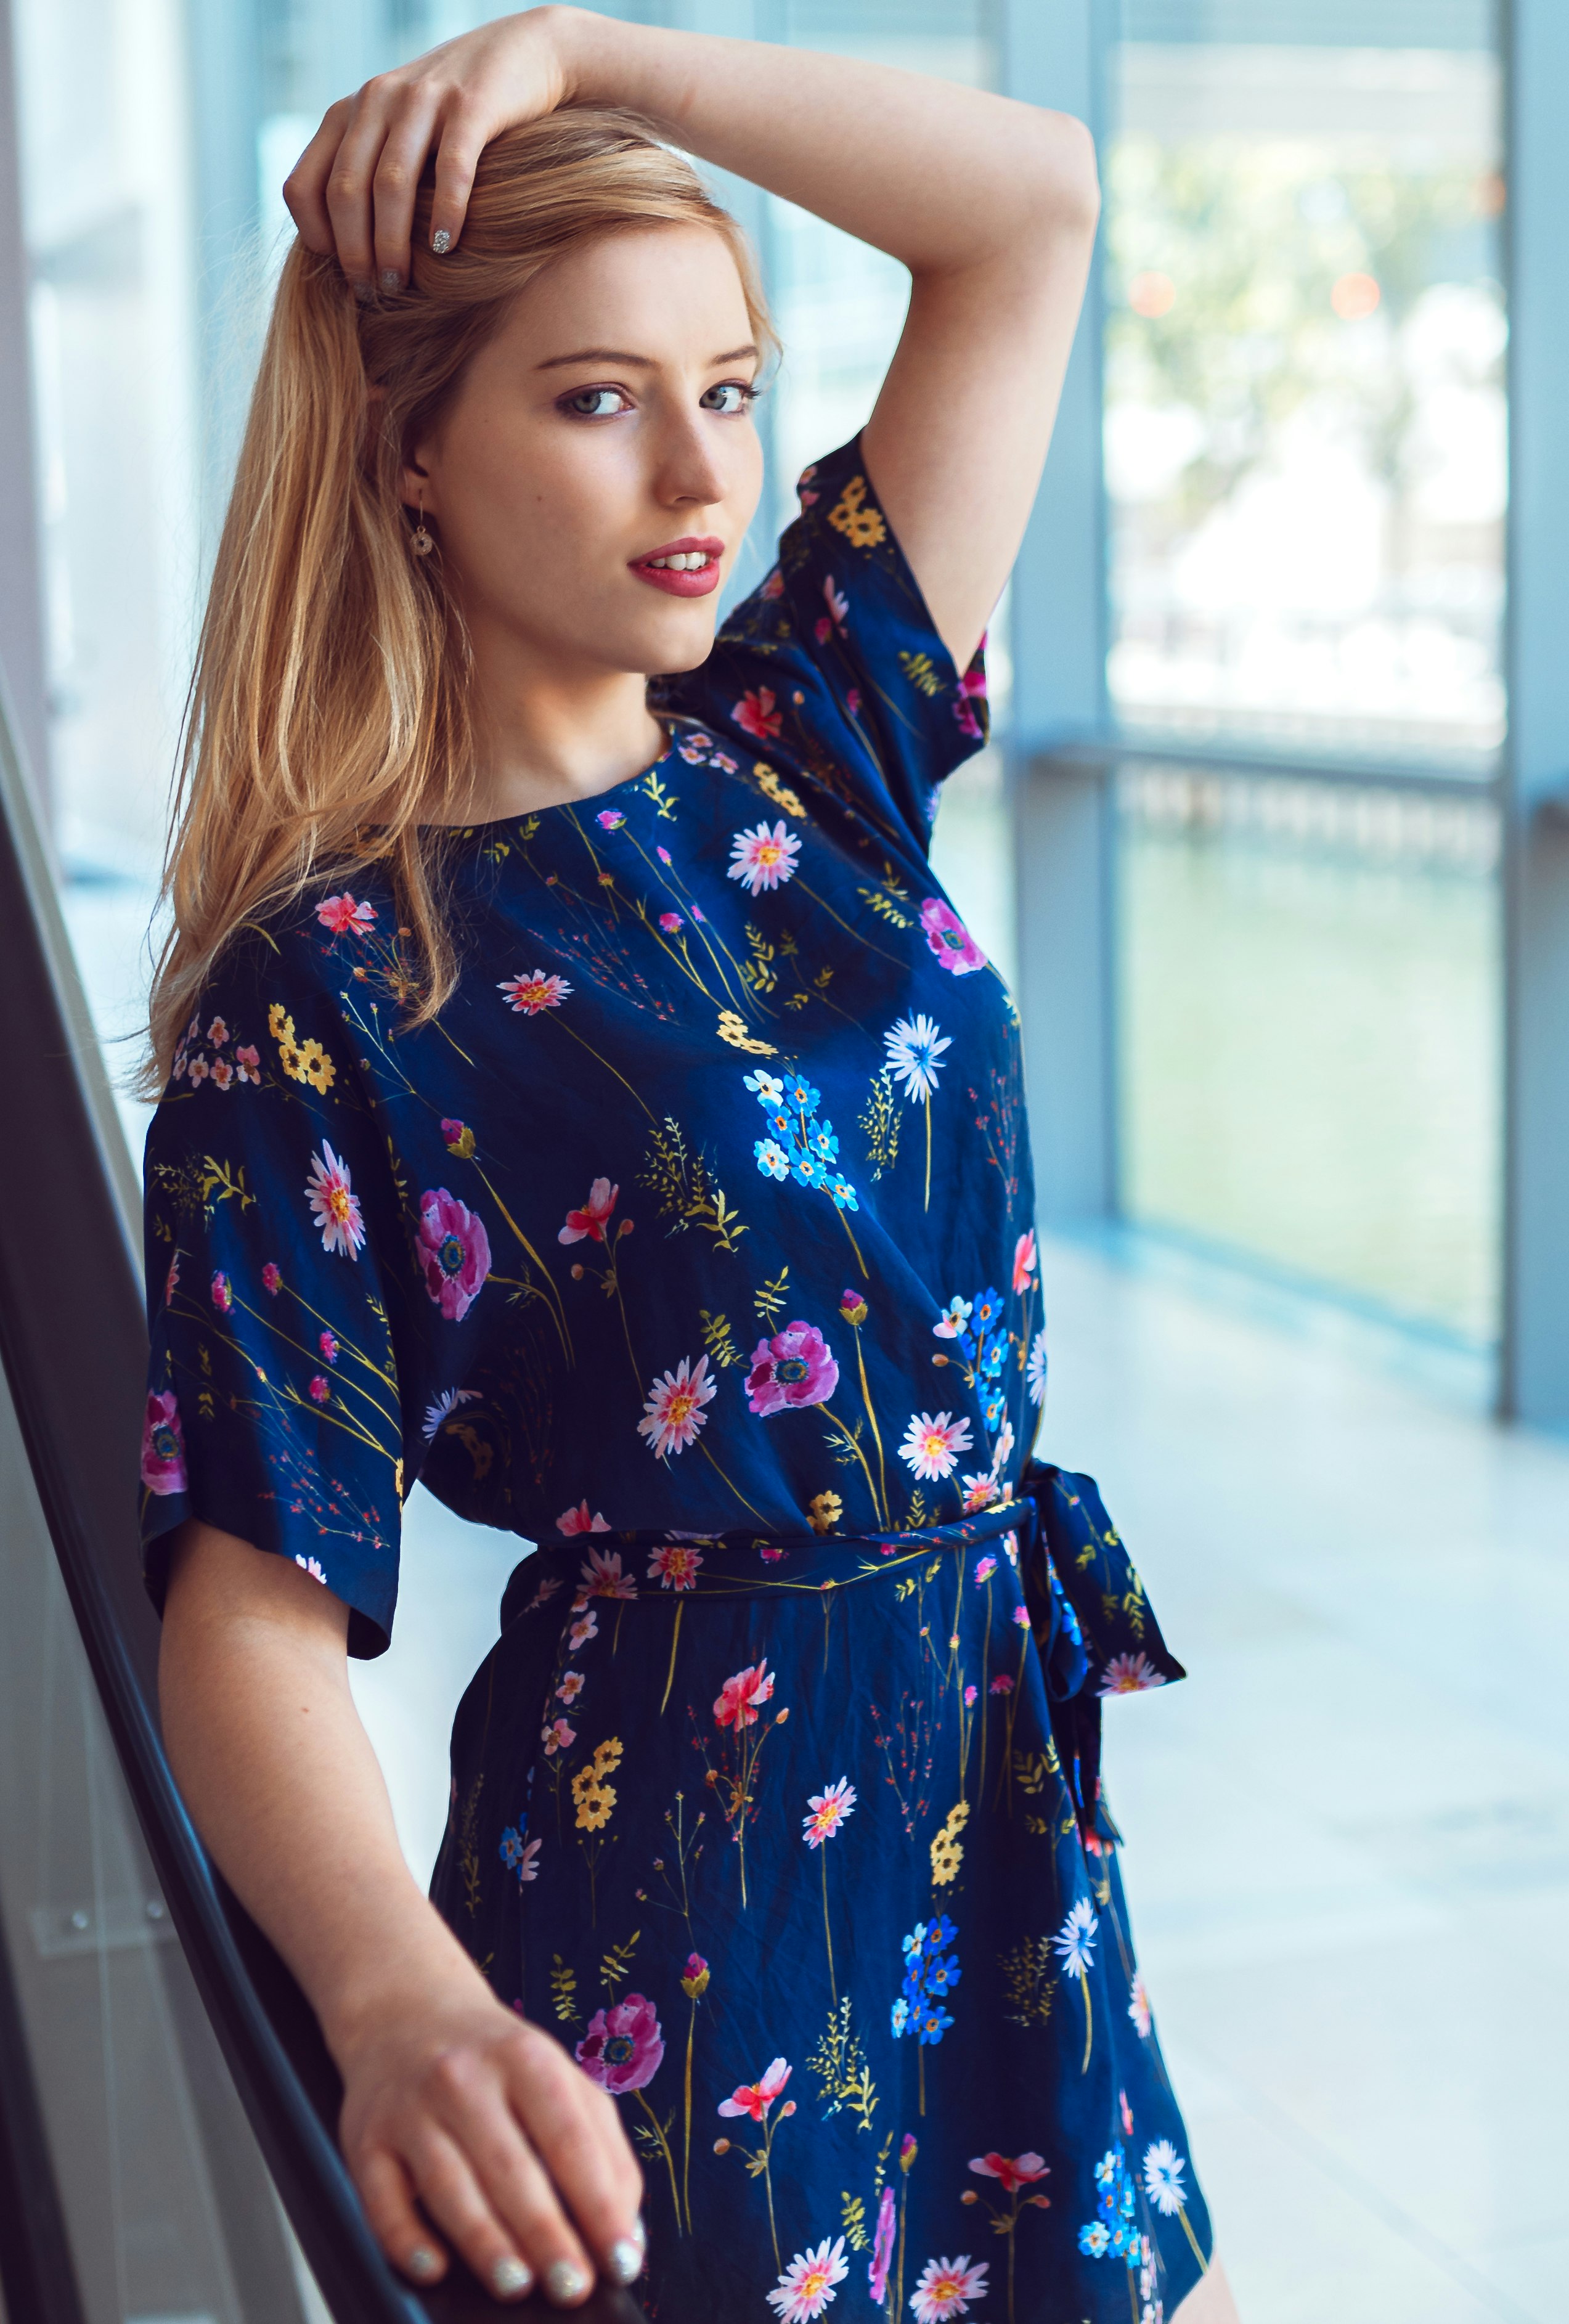 woman in blue and red floral dress